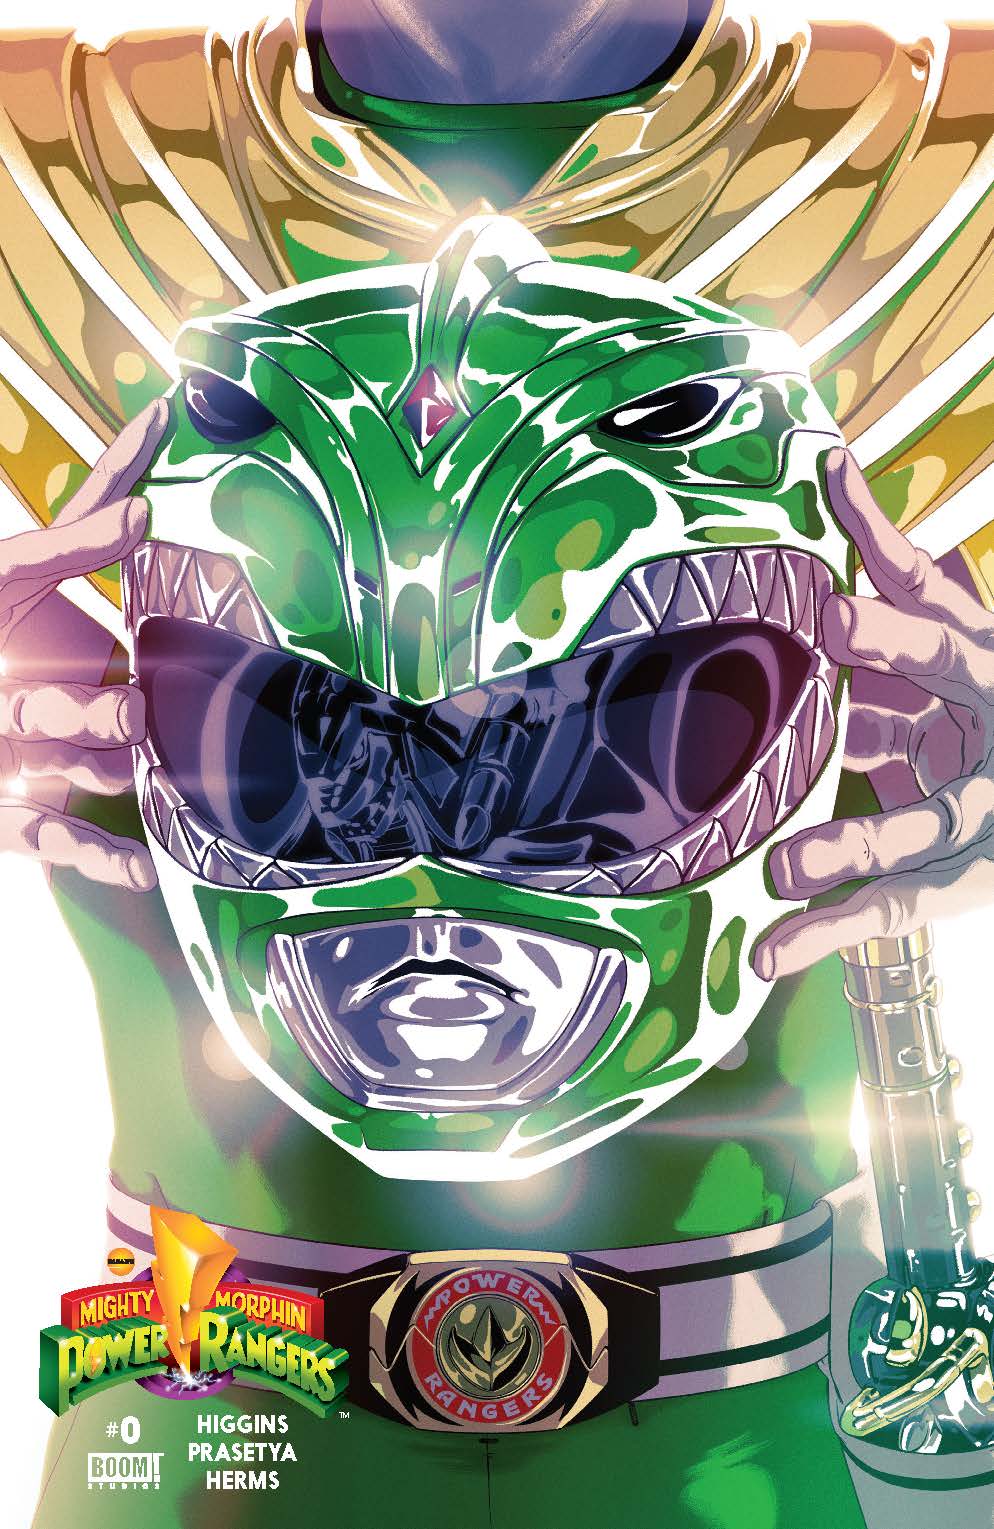 Advance Review: Mighty Morphin Power Rangers #0